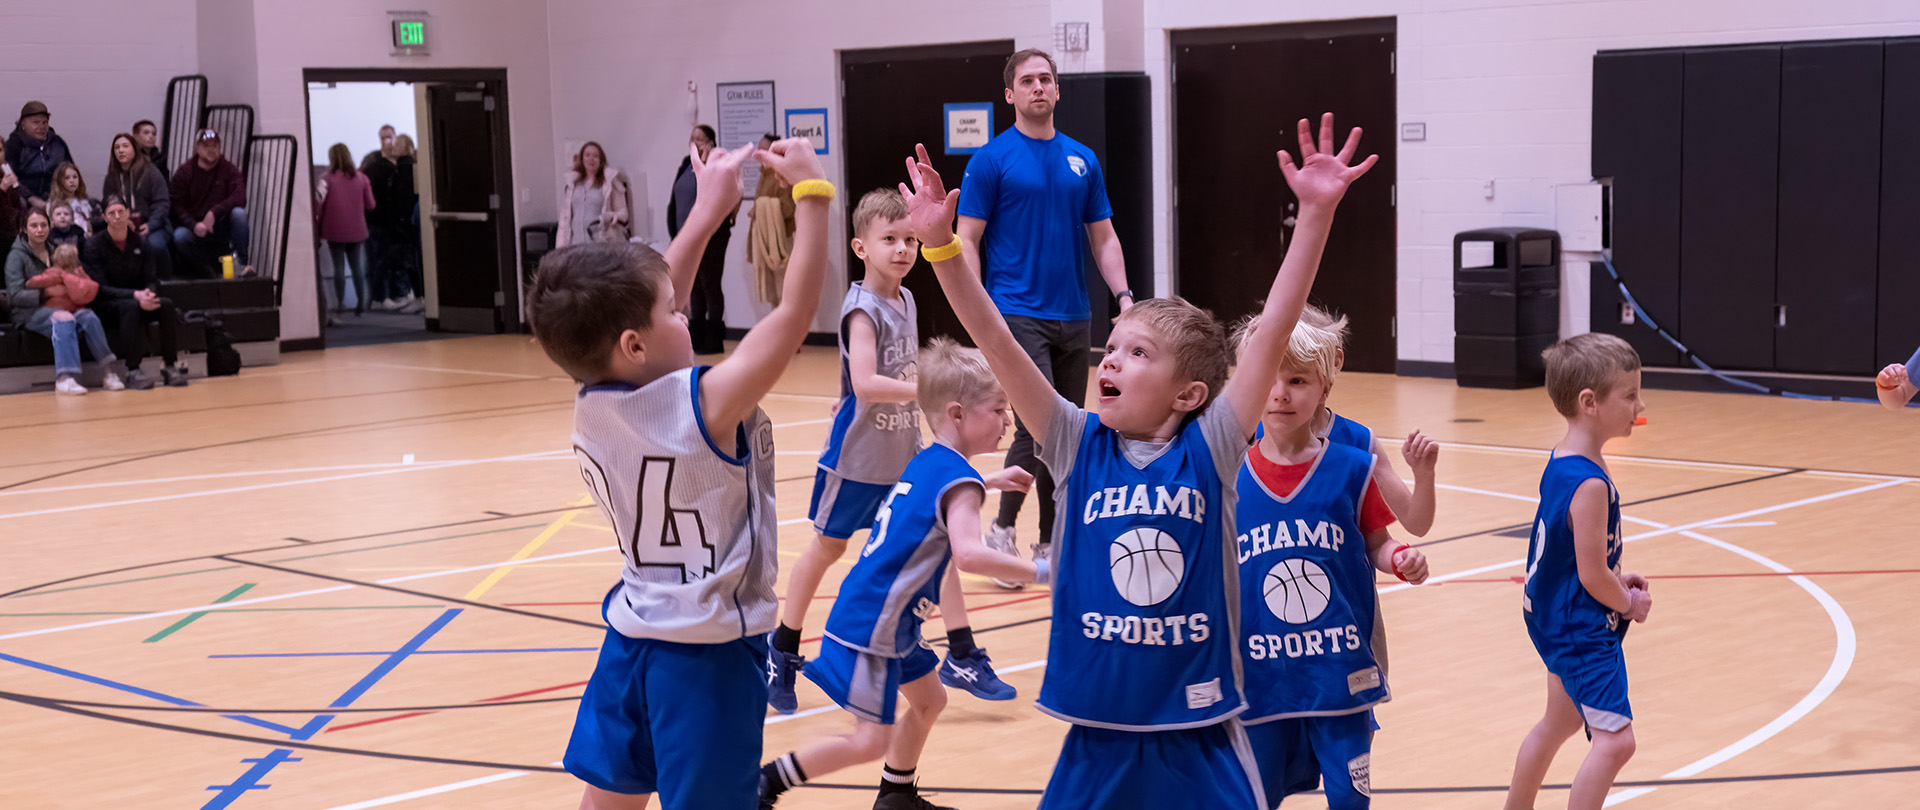 Youth Basketball
CHAMP leagues for ages 5–18
Winter Season: Nov 2023 – Feb 2024
Register now!
